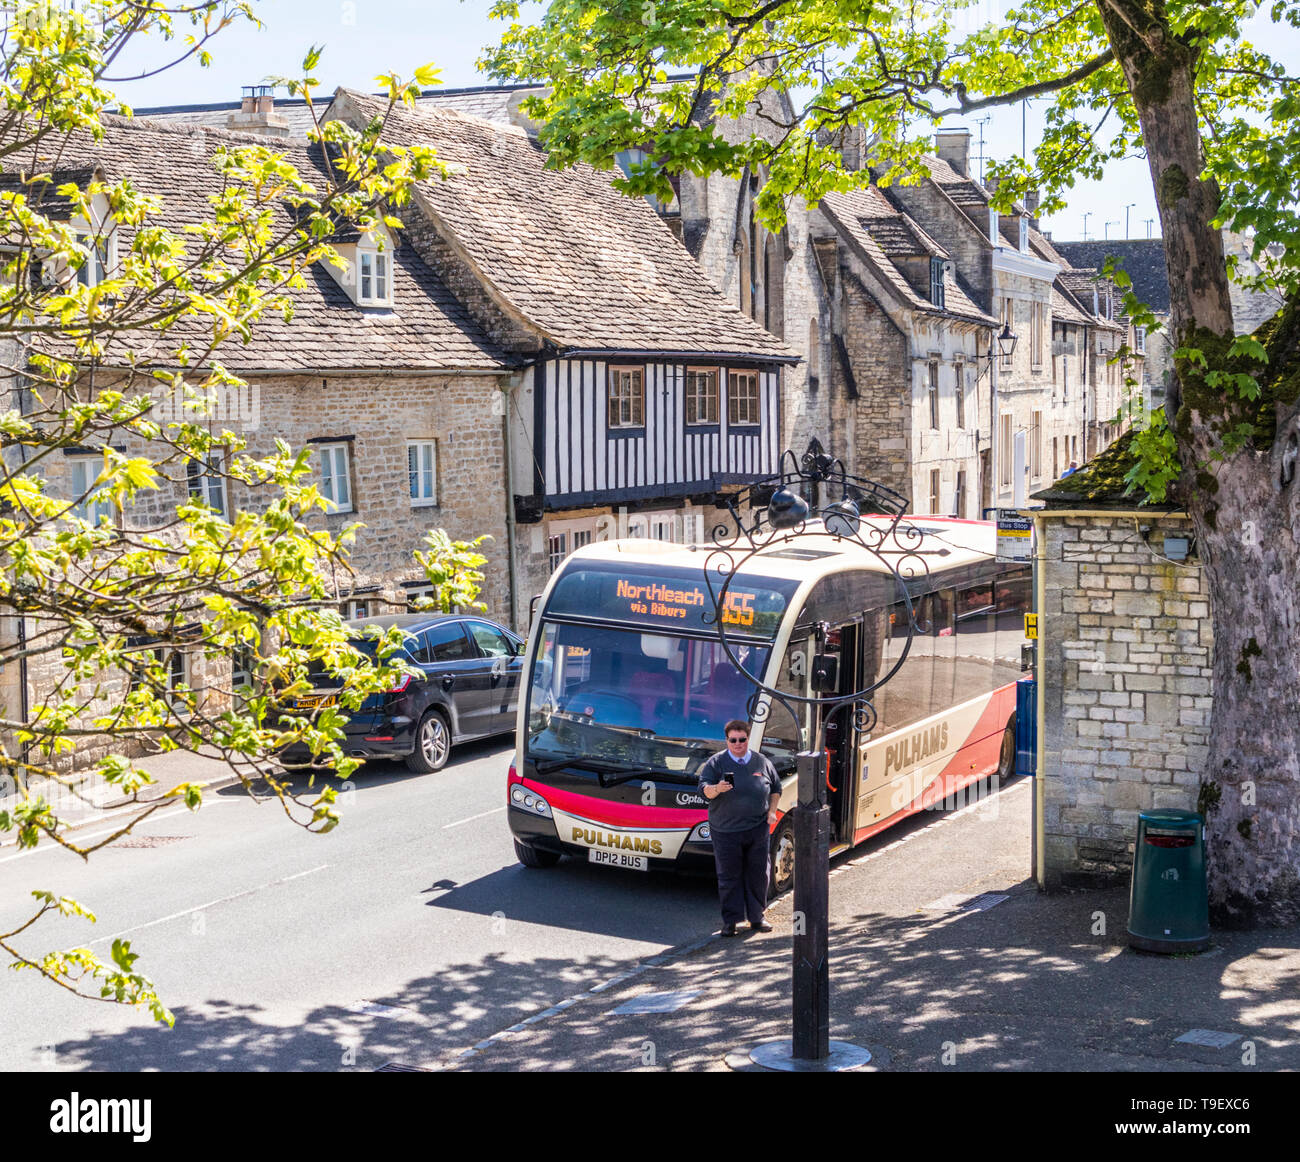 A Pulhams Coaches bus waiting at a stop beside old stone houses in the Market Place in the ancient Cotswold town of Northleach, Gloucestershire UK Stock Photo